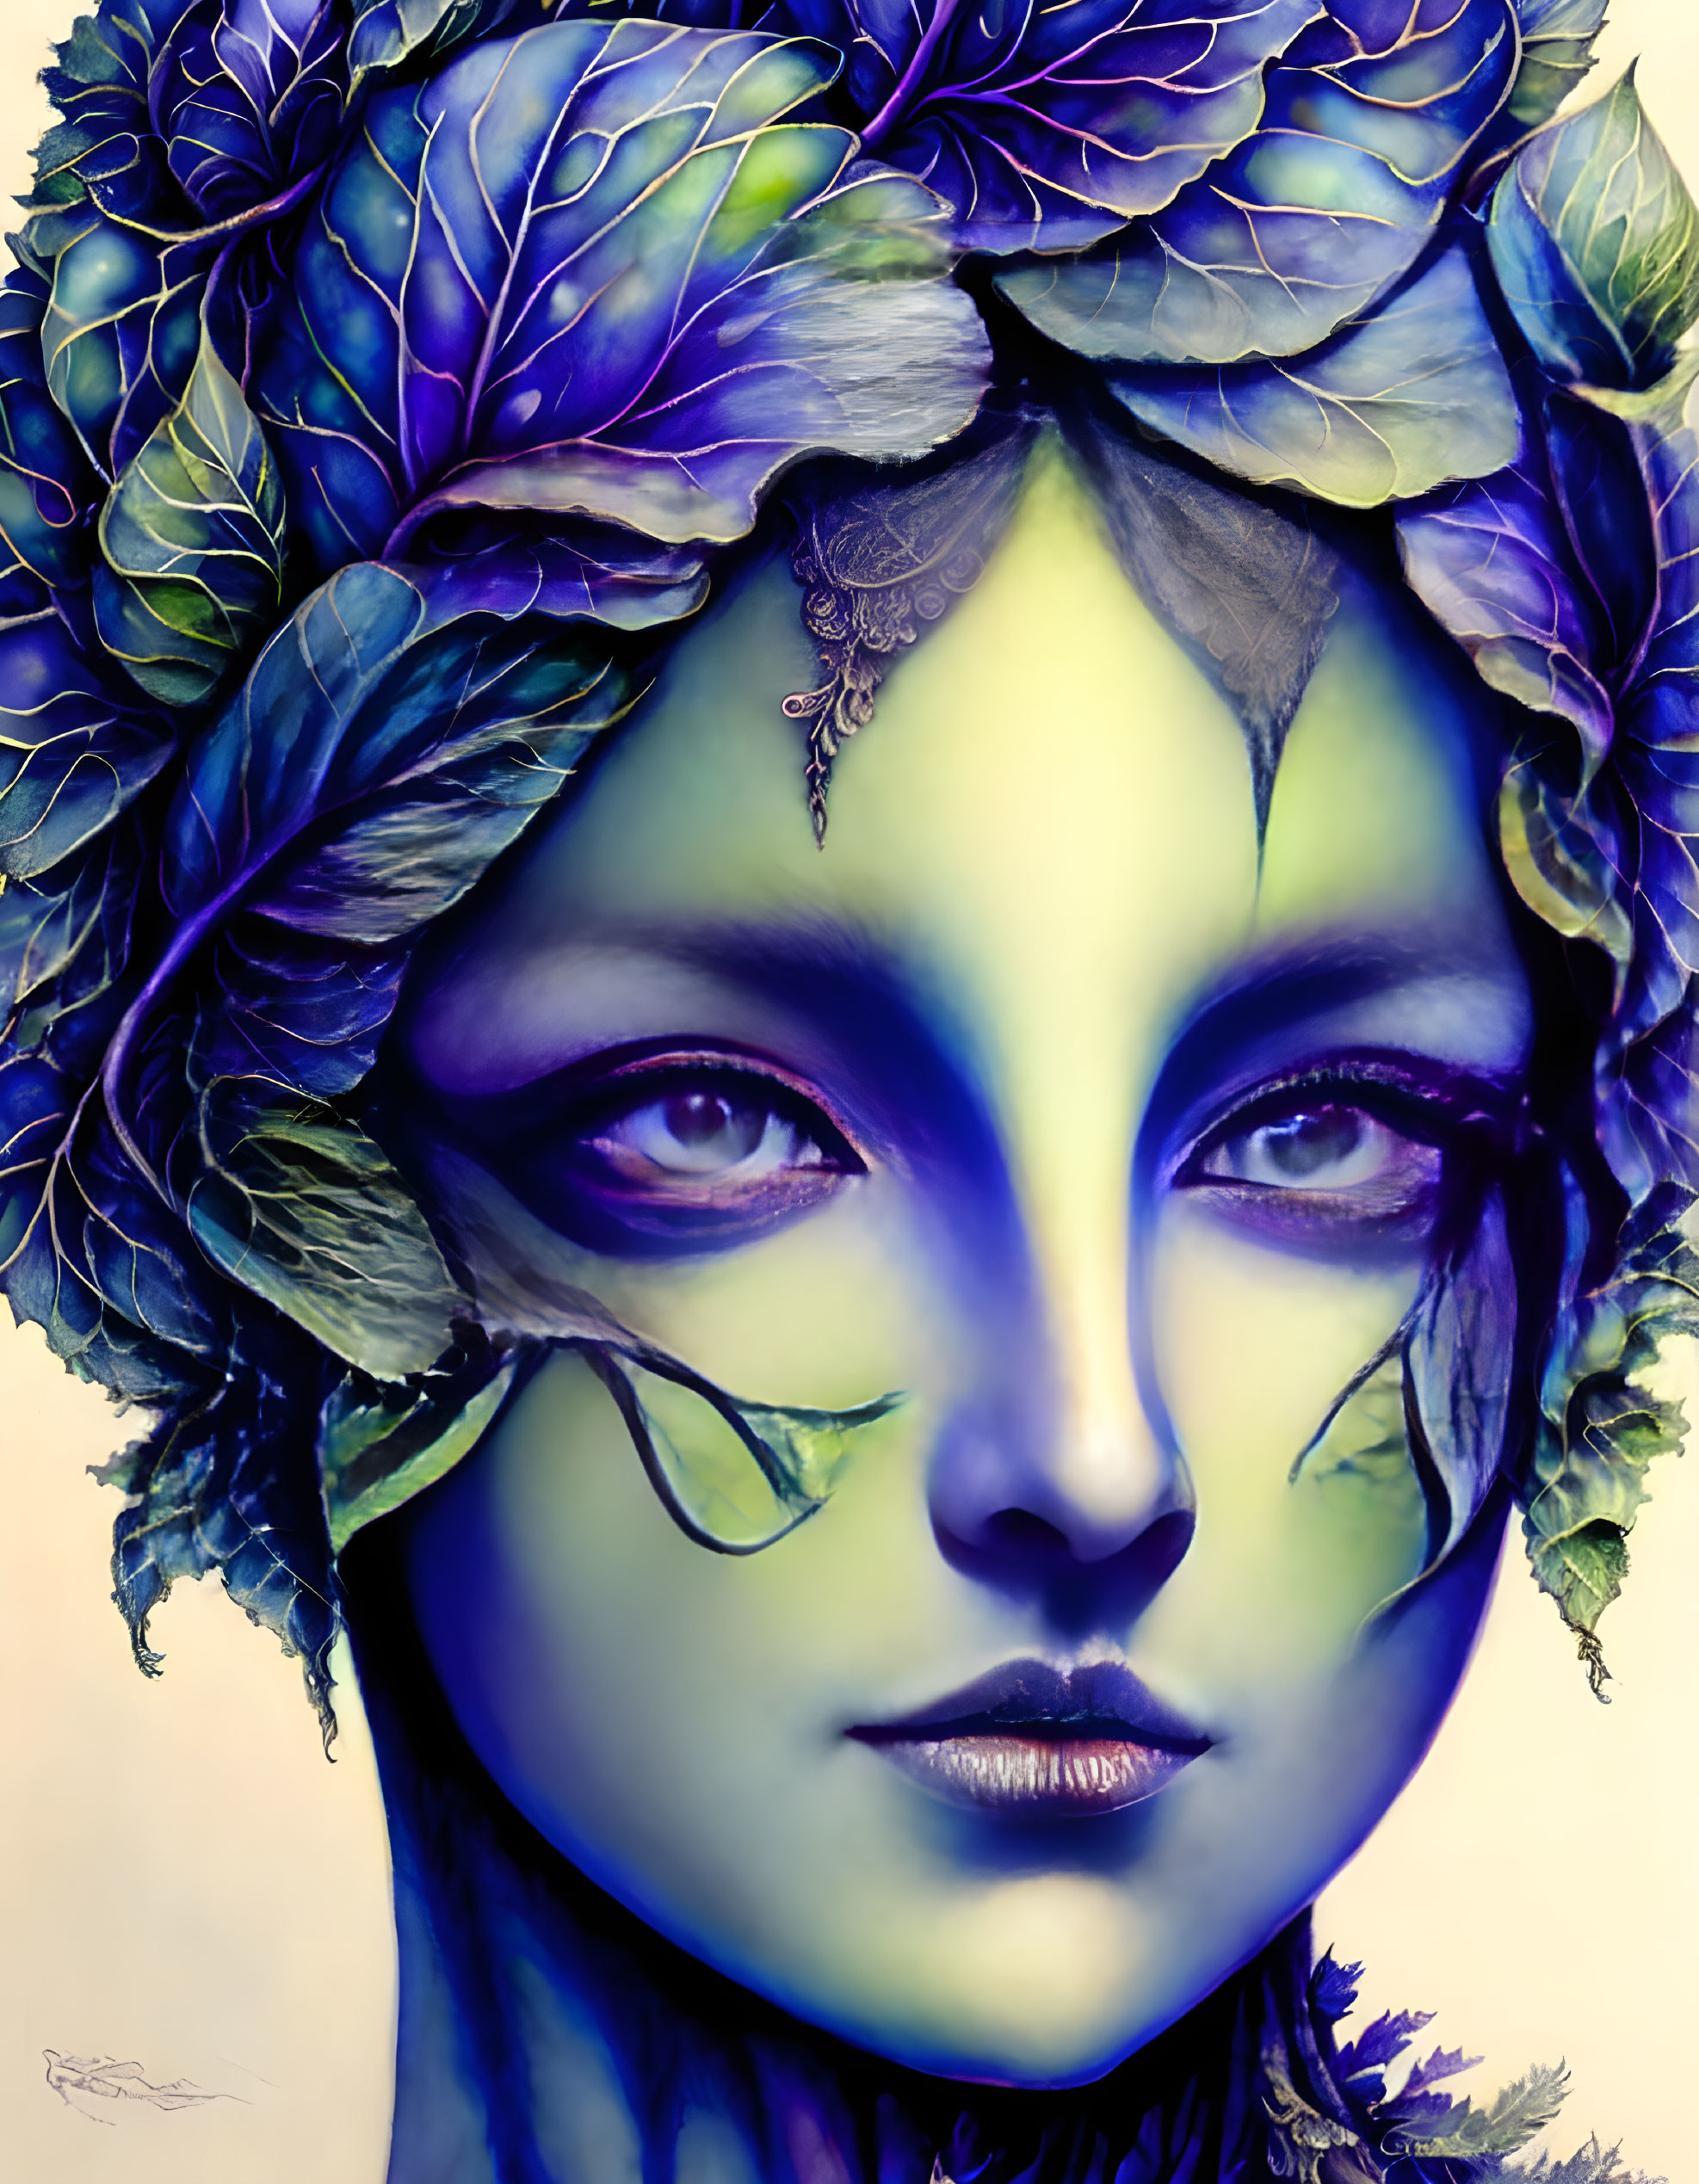 Illustrated female figure with purple skin and leaf hair in fantasy art